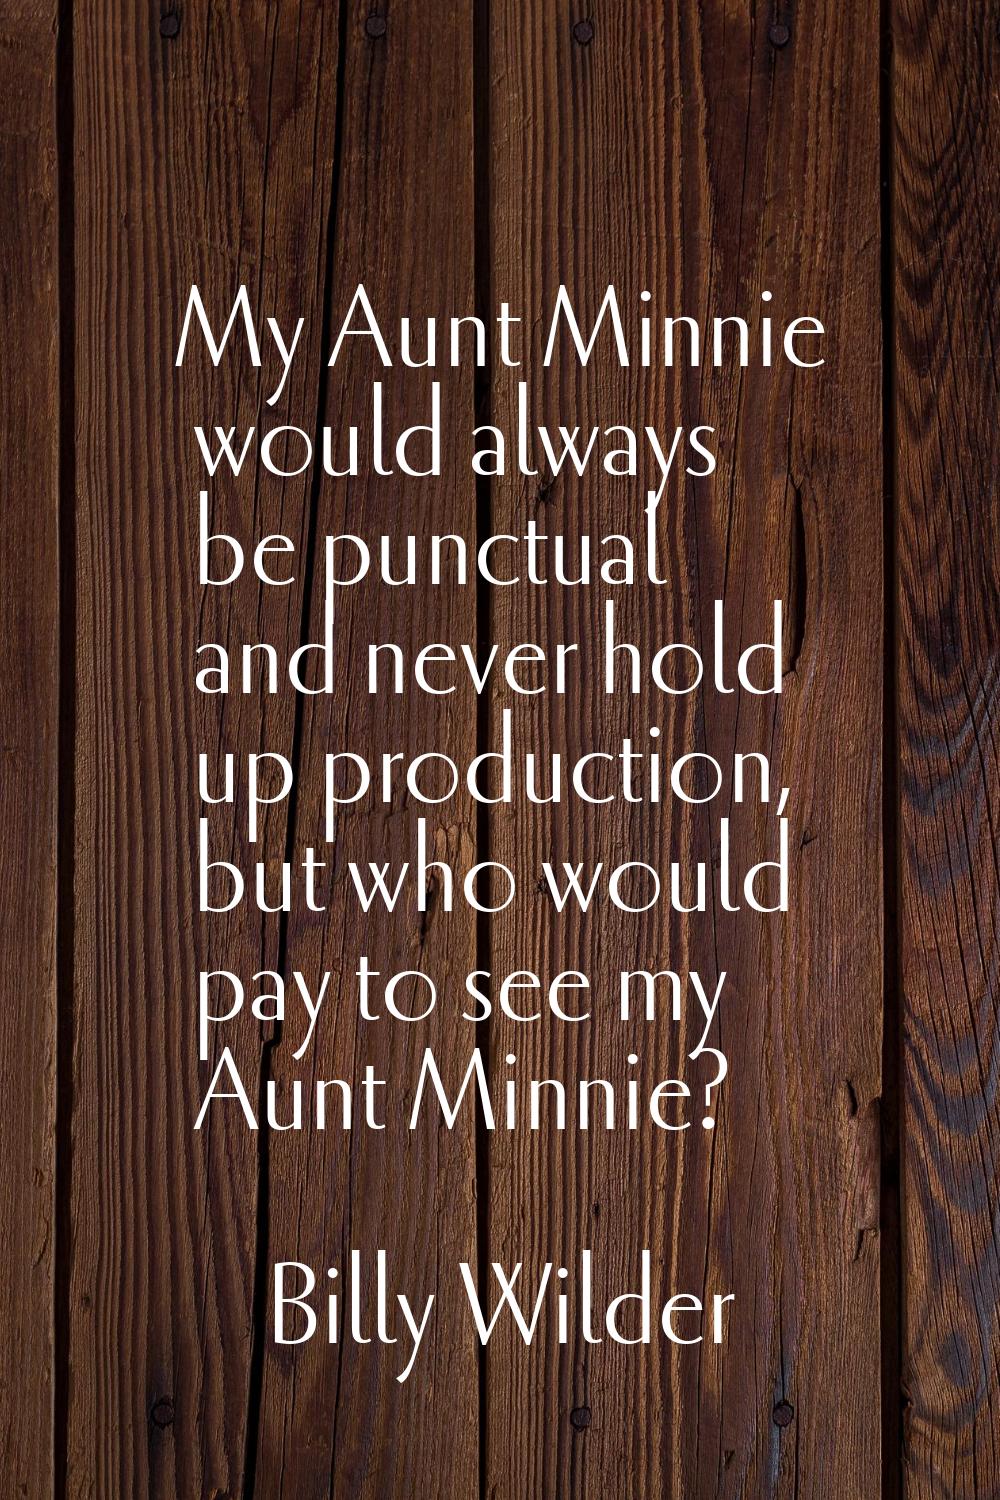 My Aunt Minnie would always be punctual and never hold up production, but who would pay to see my A